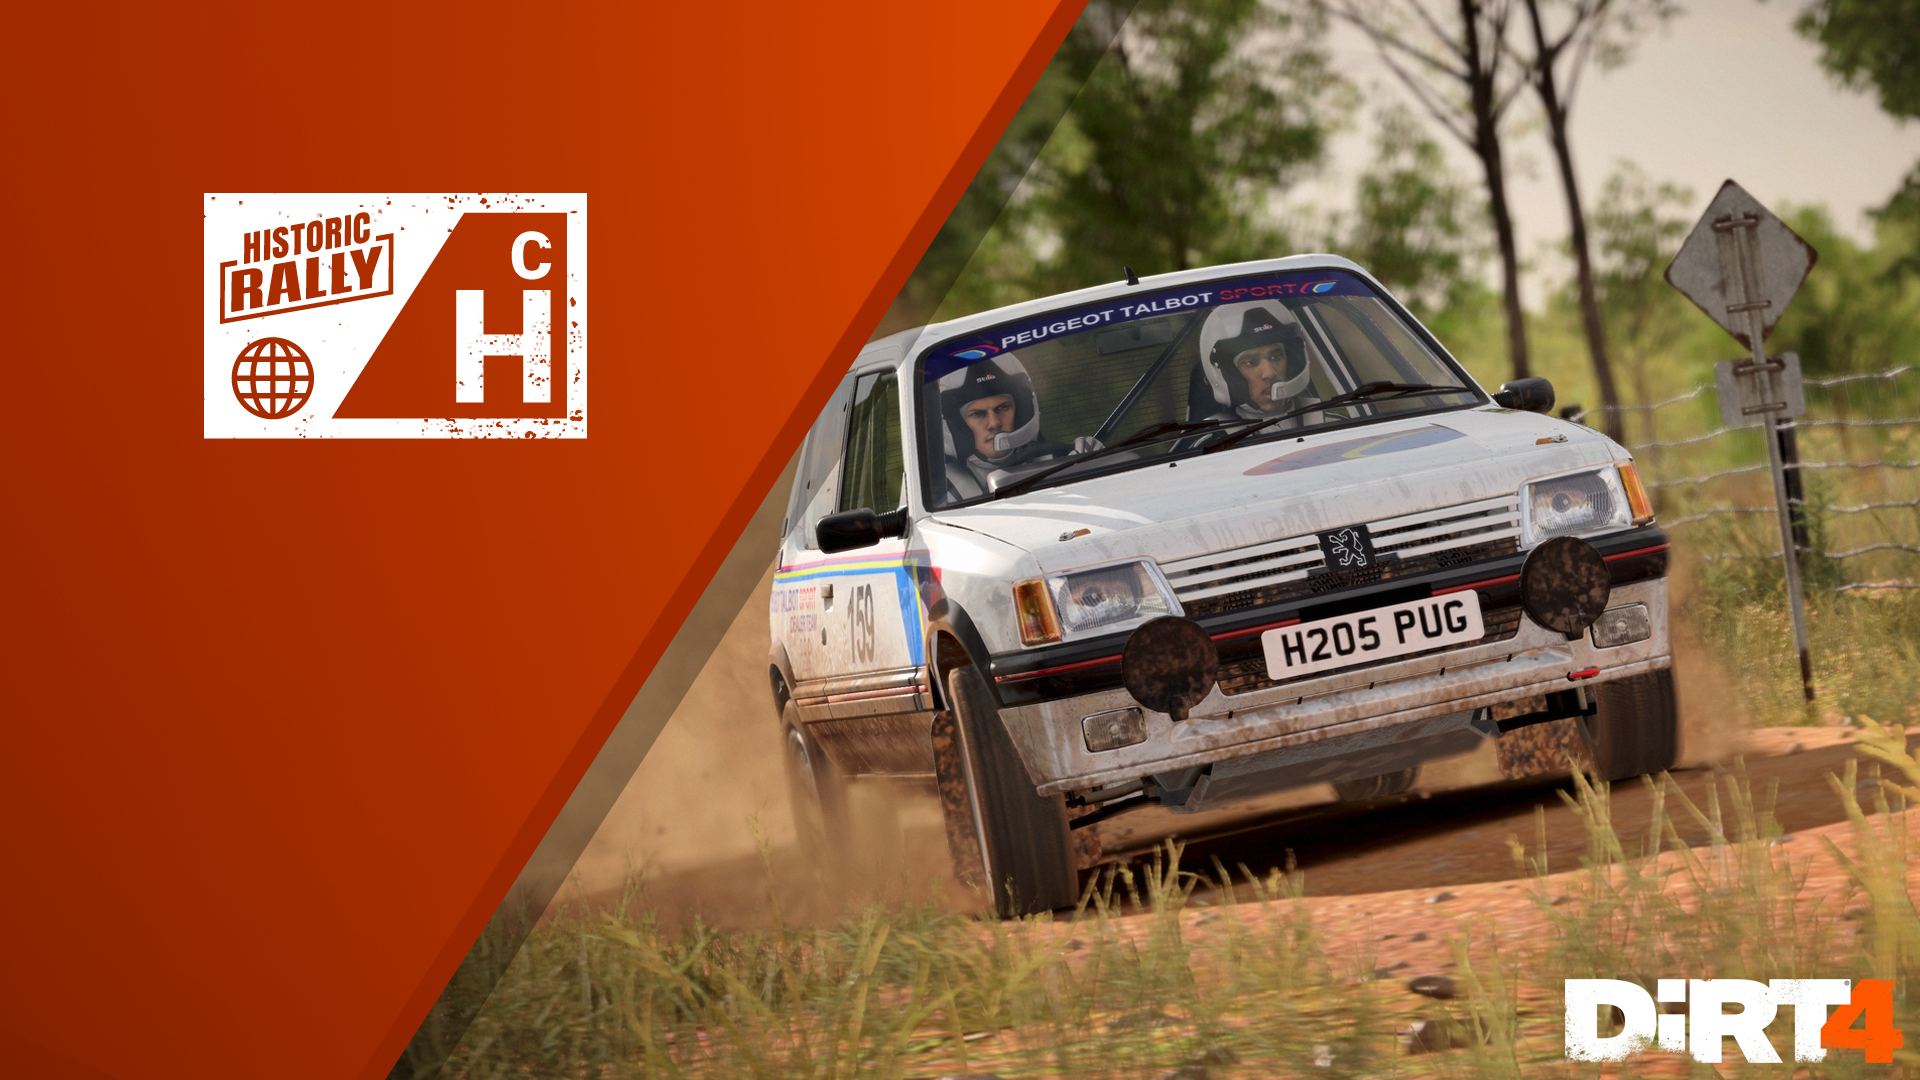 Icon for International Rally H-C